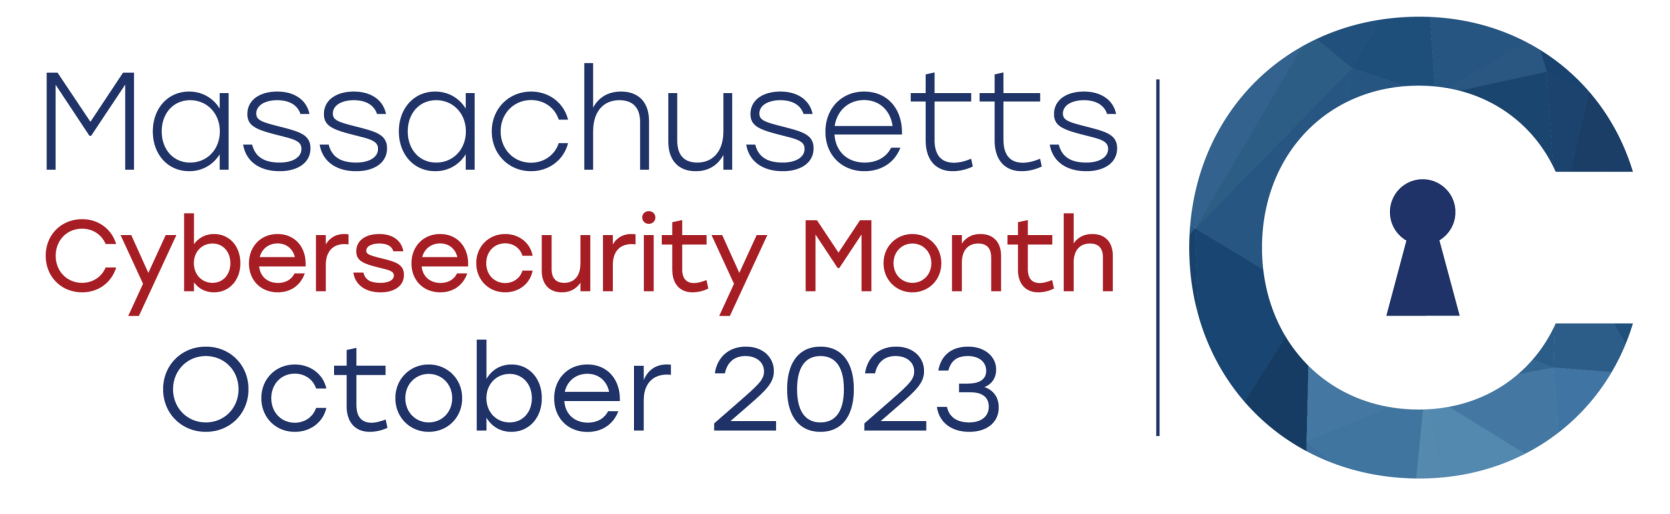 MA Cybersecurity Month 2023